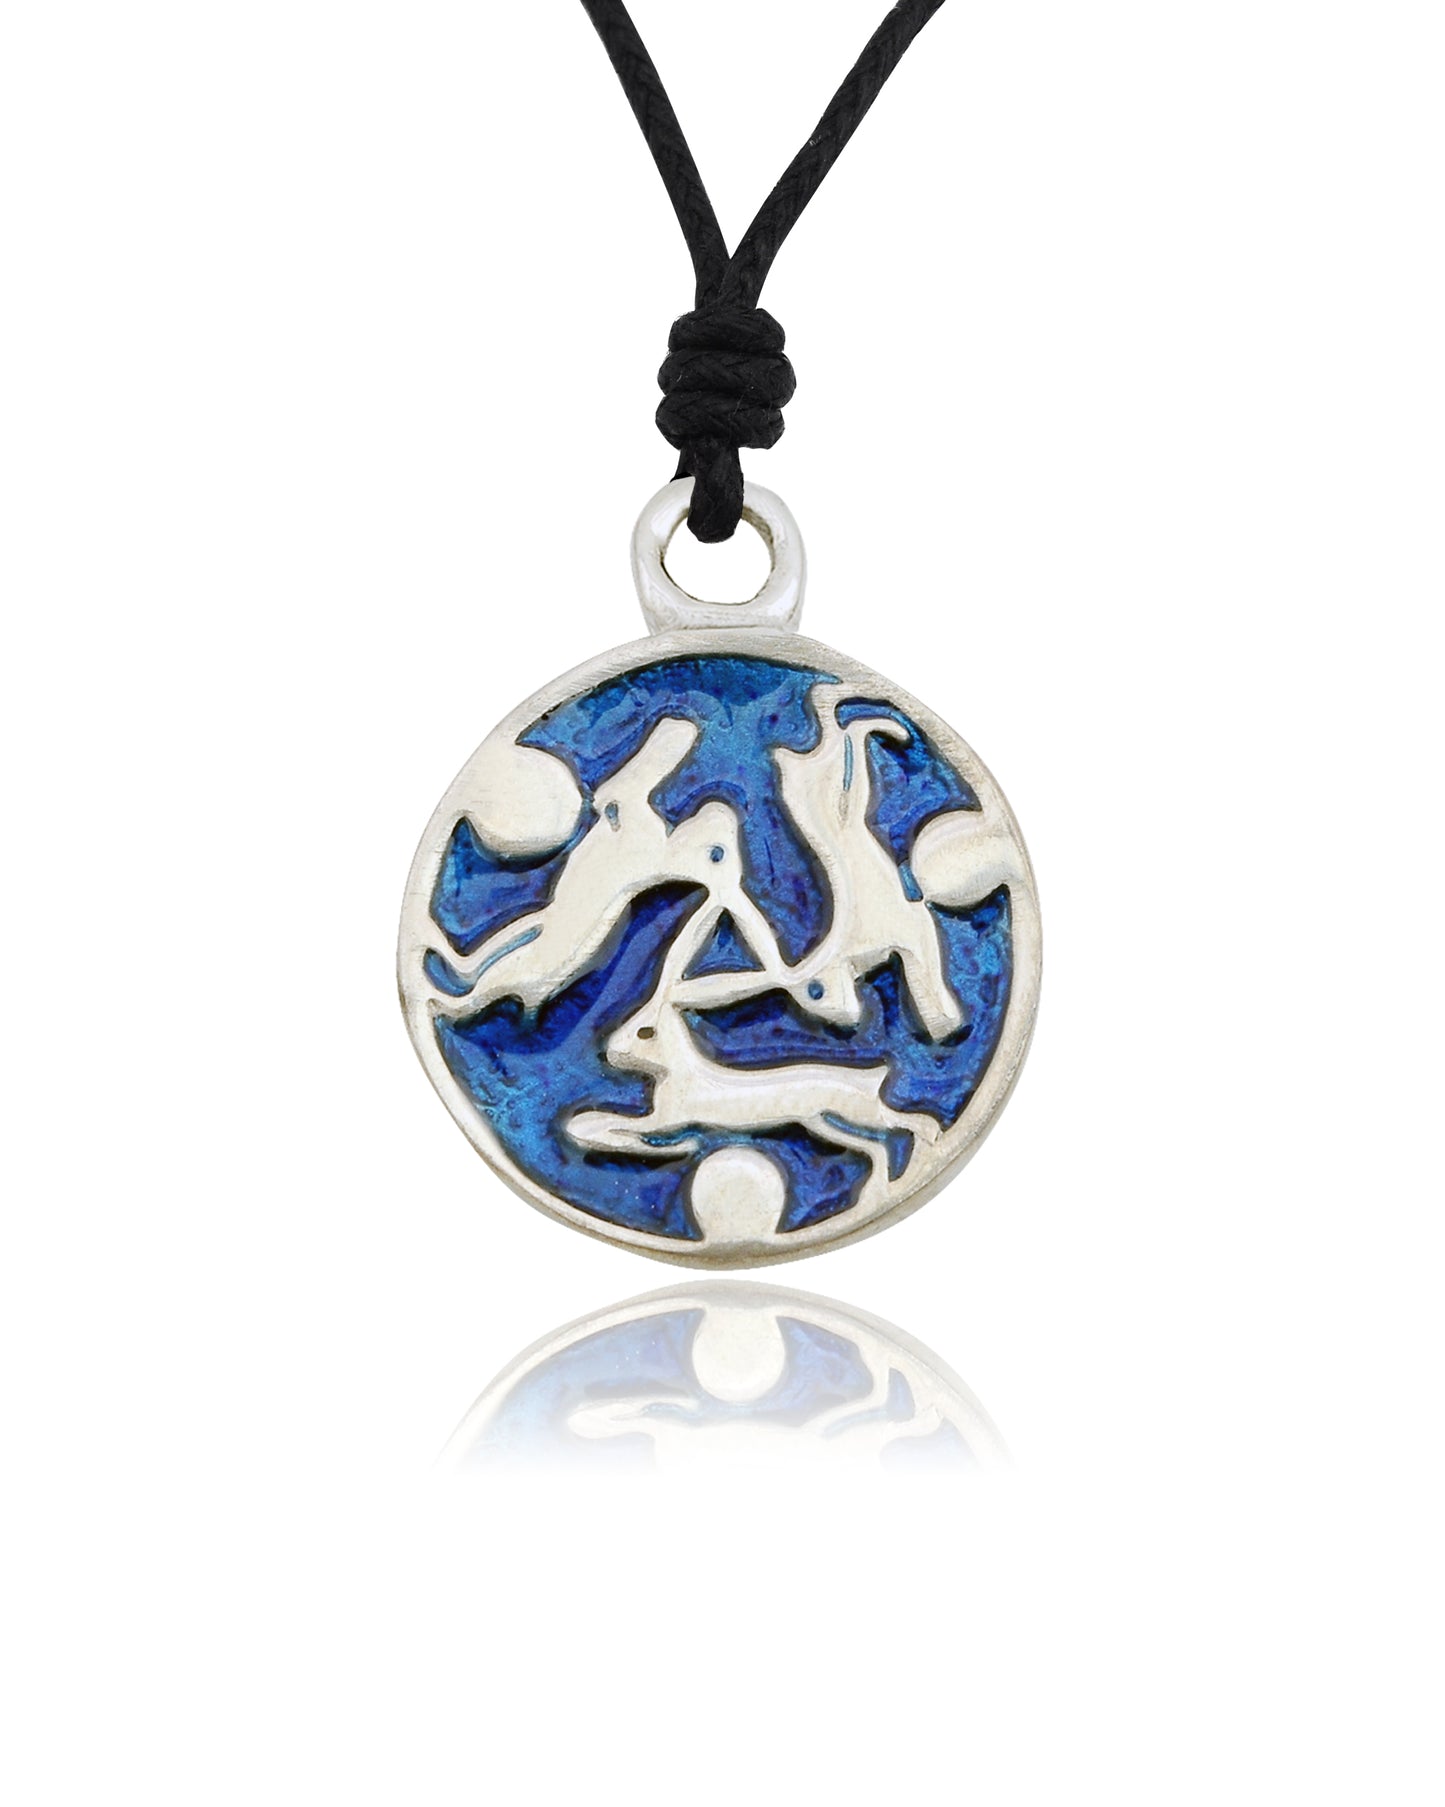 Blue Ranger Design Silver Pewter Charm Necklace Pendant Jewelry